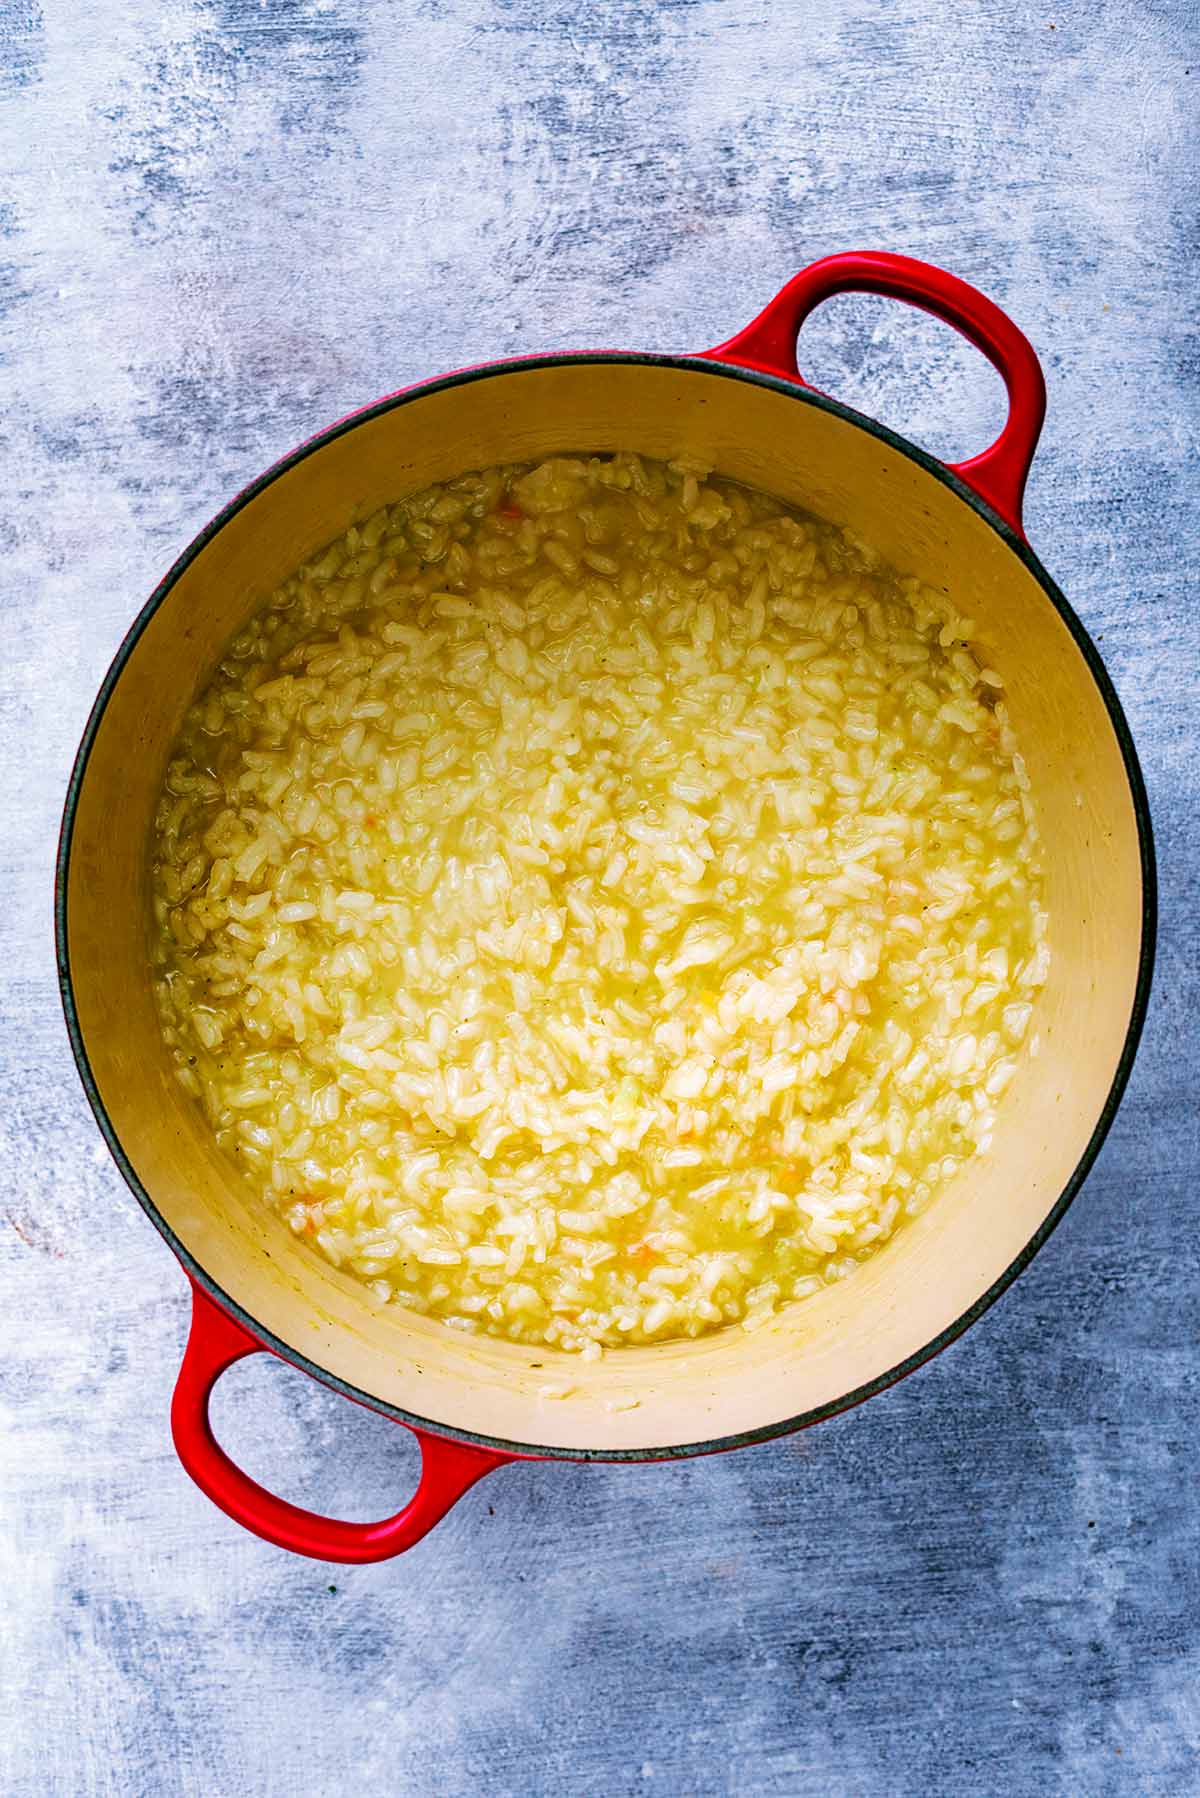 A large red pan containing cooked risotto rice.